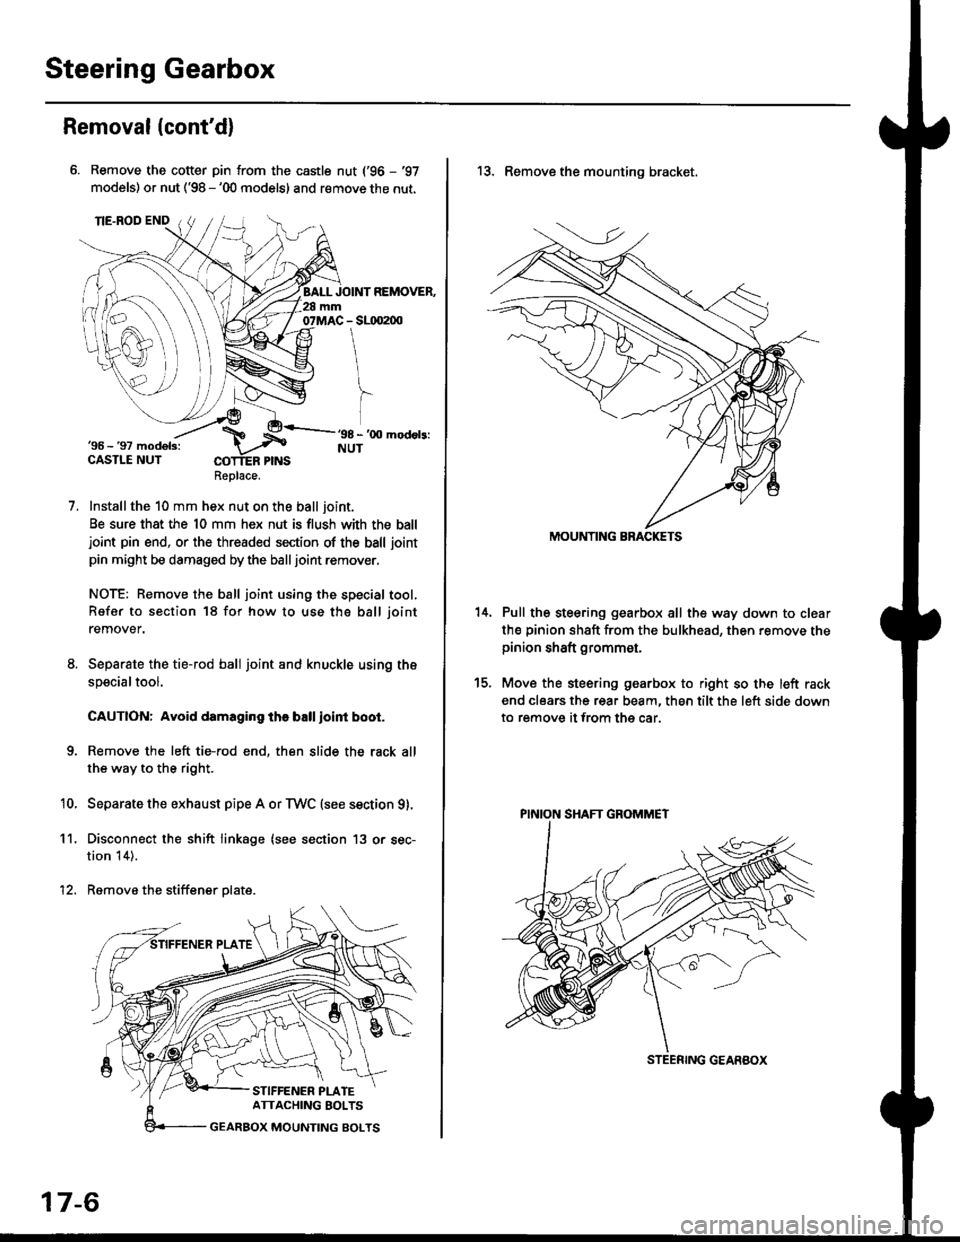 HONDA CIVIC 1996 6.G Workshop Manual Steering Gearbox
Removal(contd)
Remove the cotter pin from the castle nut (96 - 97
models) or nut (98 - 00 models) and remove the nut.
Installthe 10 mm hex nut on the ball joint.
Be sure that the